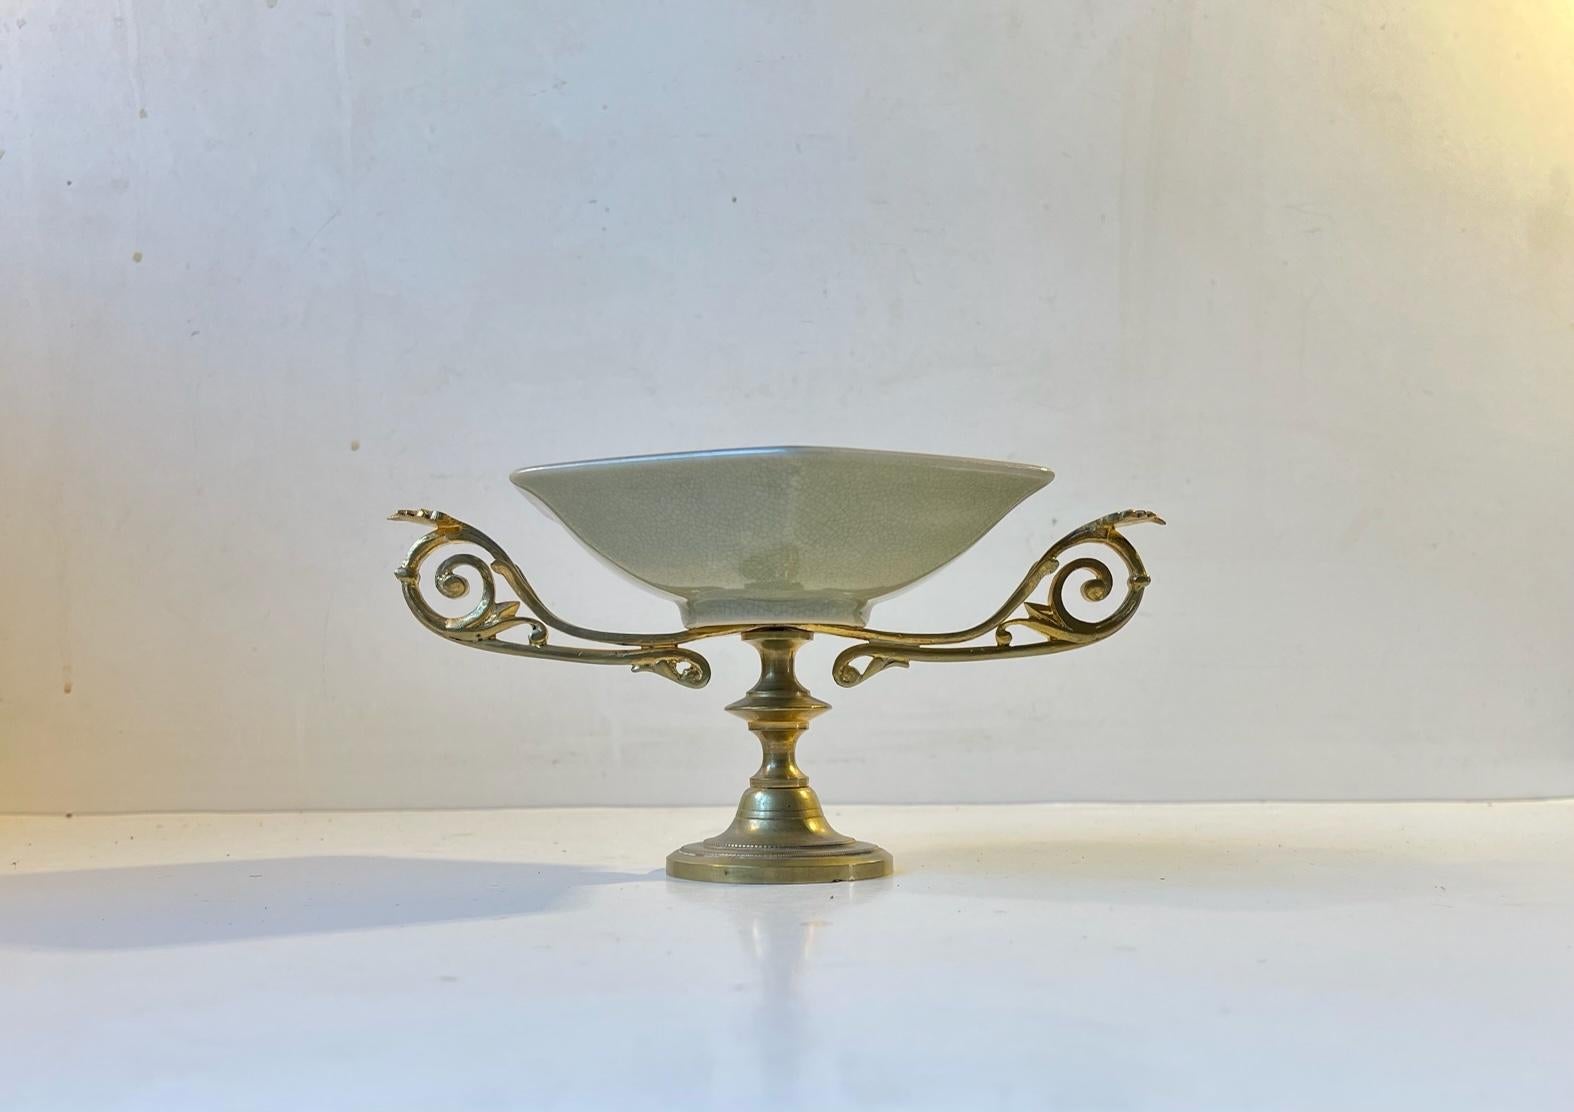 Small stylish pedestal for bonbons, chocolates, cookies or sugar. Craquele tin-glazed bowl with hand-painted floral, gold glaze motif and an intricate brass base with fine details. Designed and manufactured at Royal Copenhagen in Denmark during the